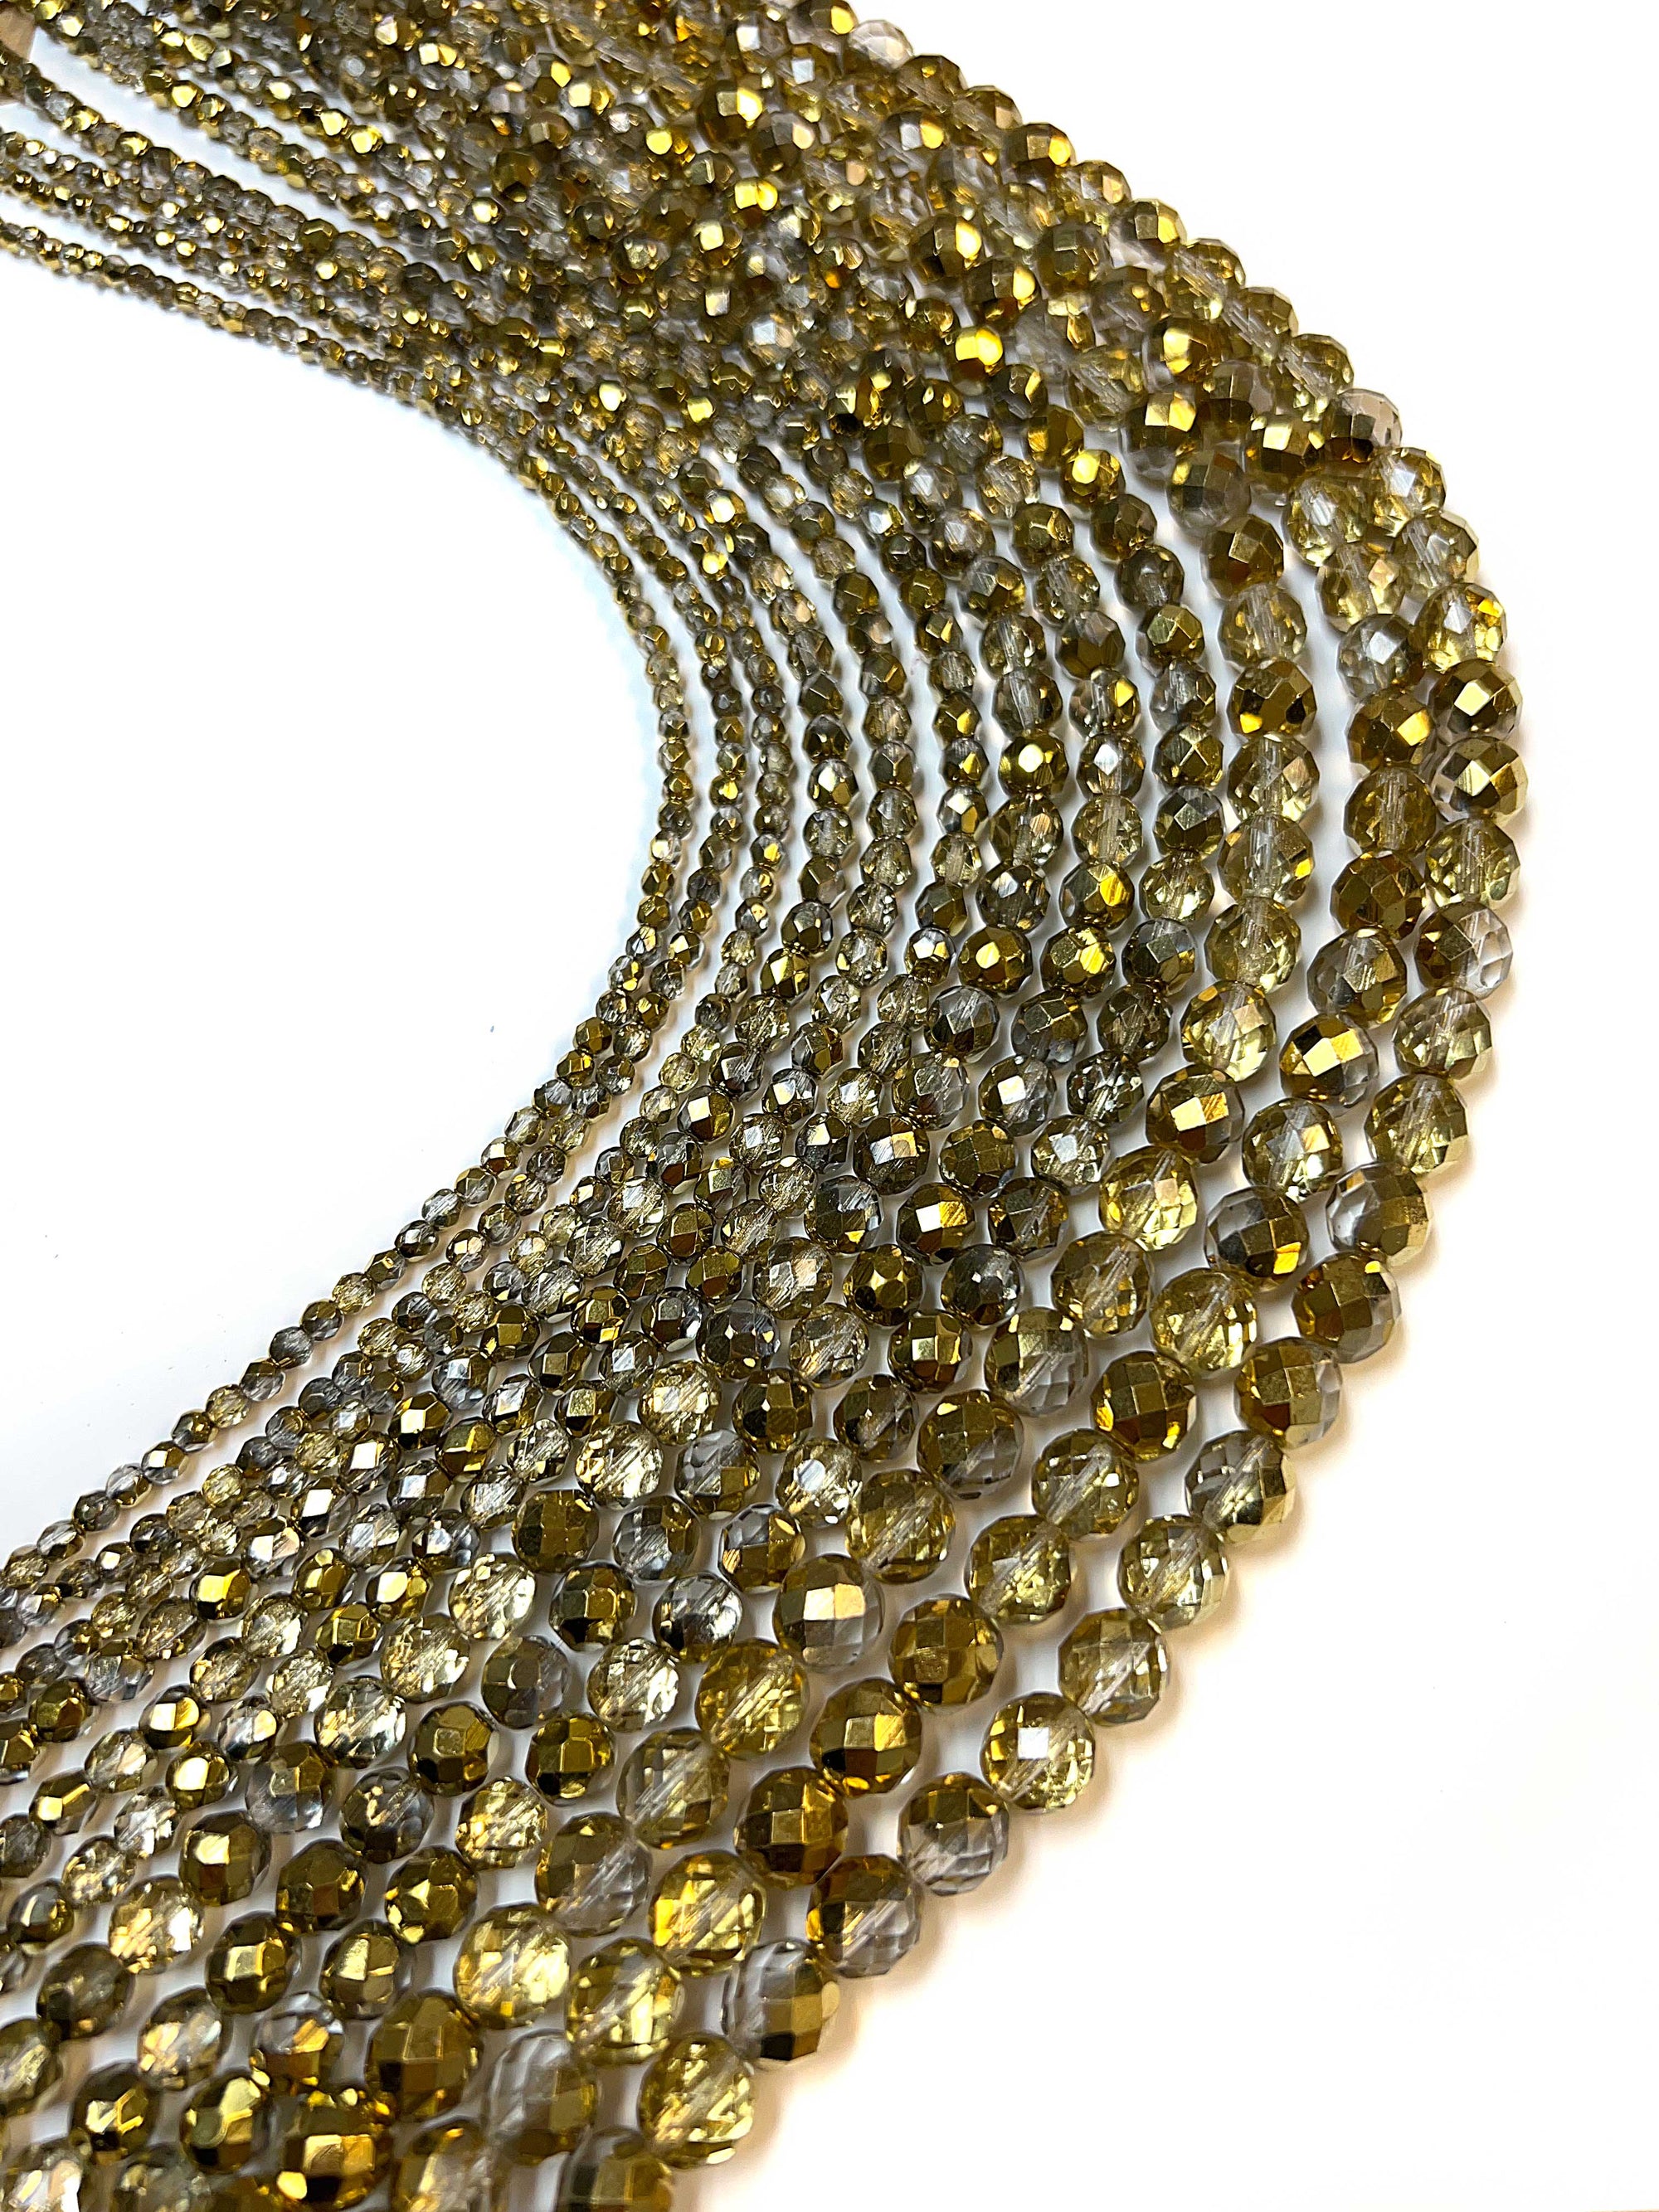 Crystal Amber Aureate 2-sided Gold coated, loose Czech Fire Polished Round Faceted Glass Beads, size 3mm, 6mm